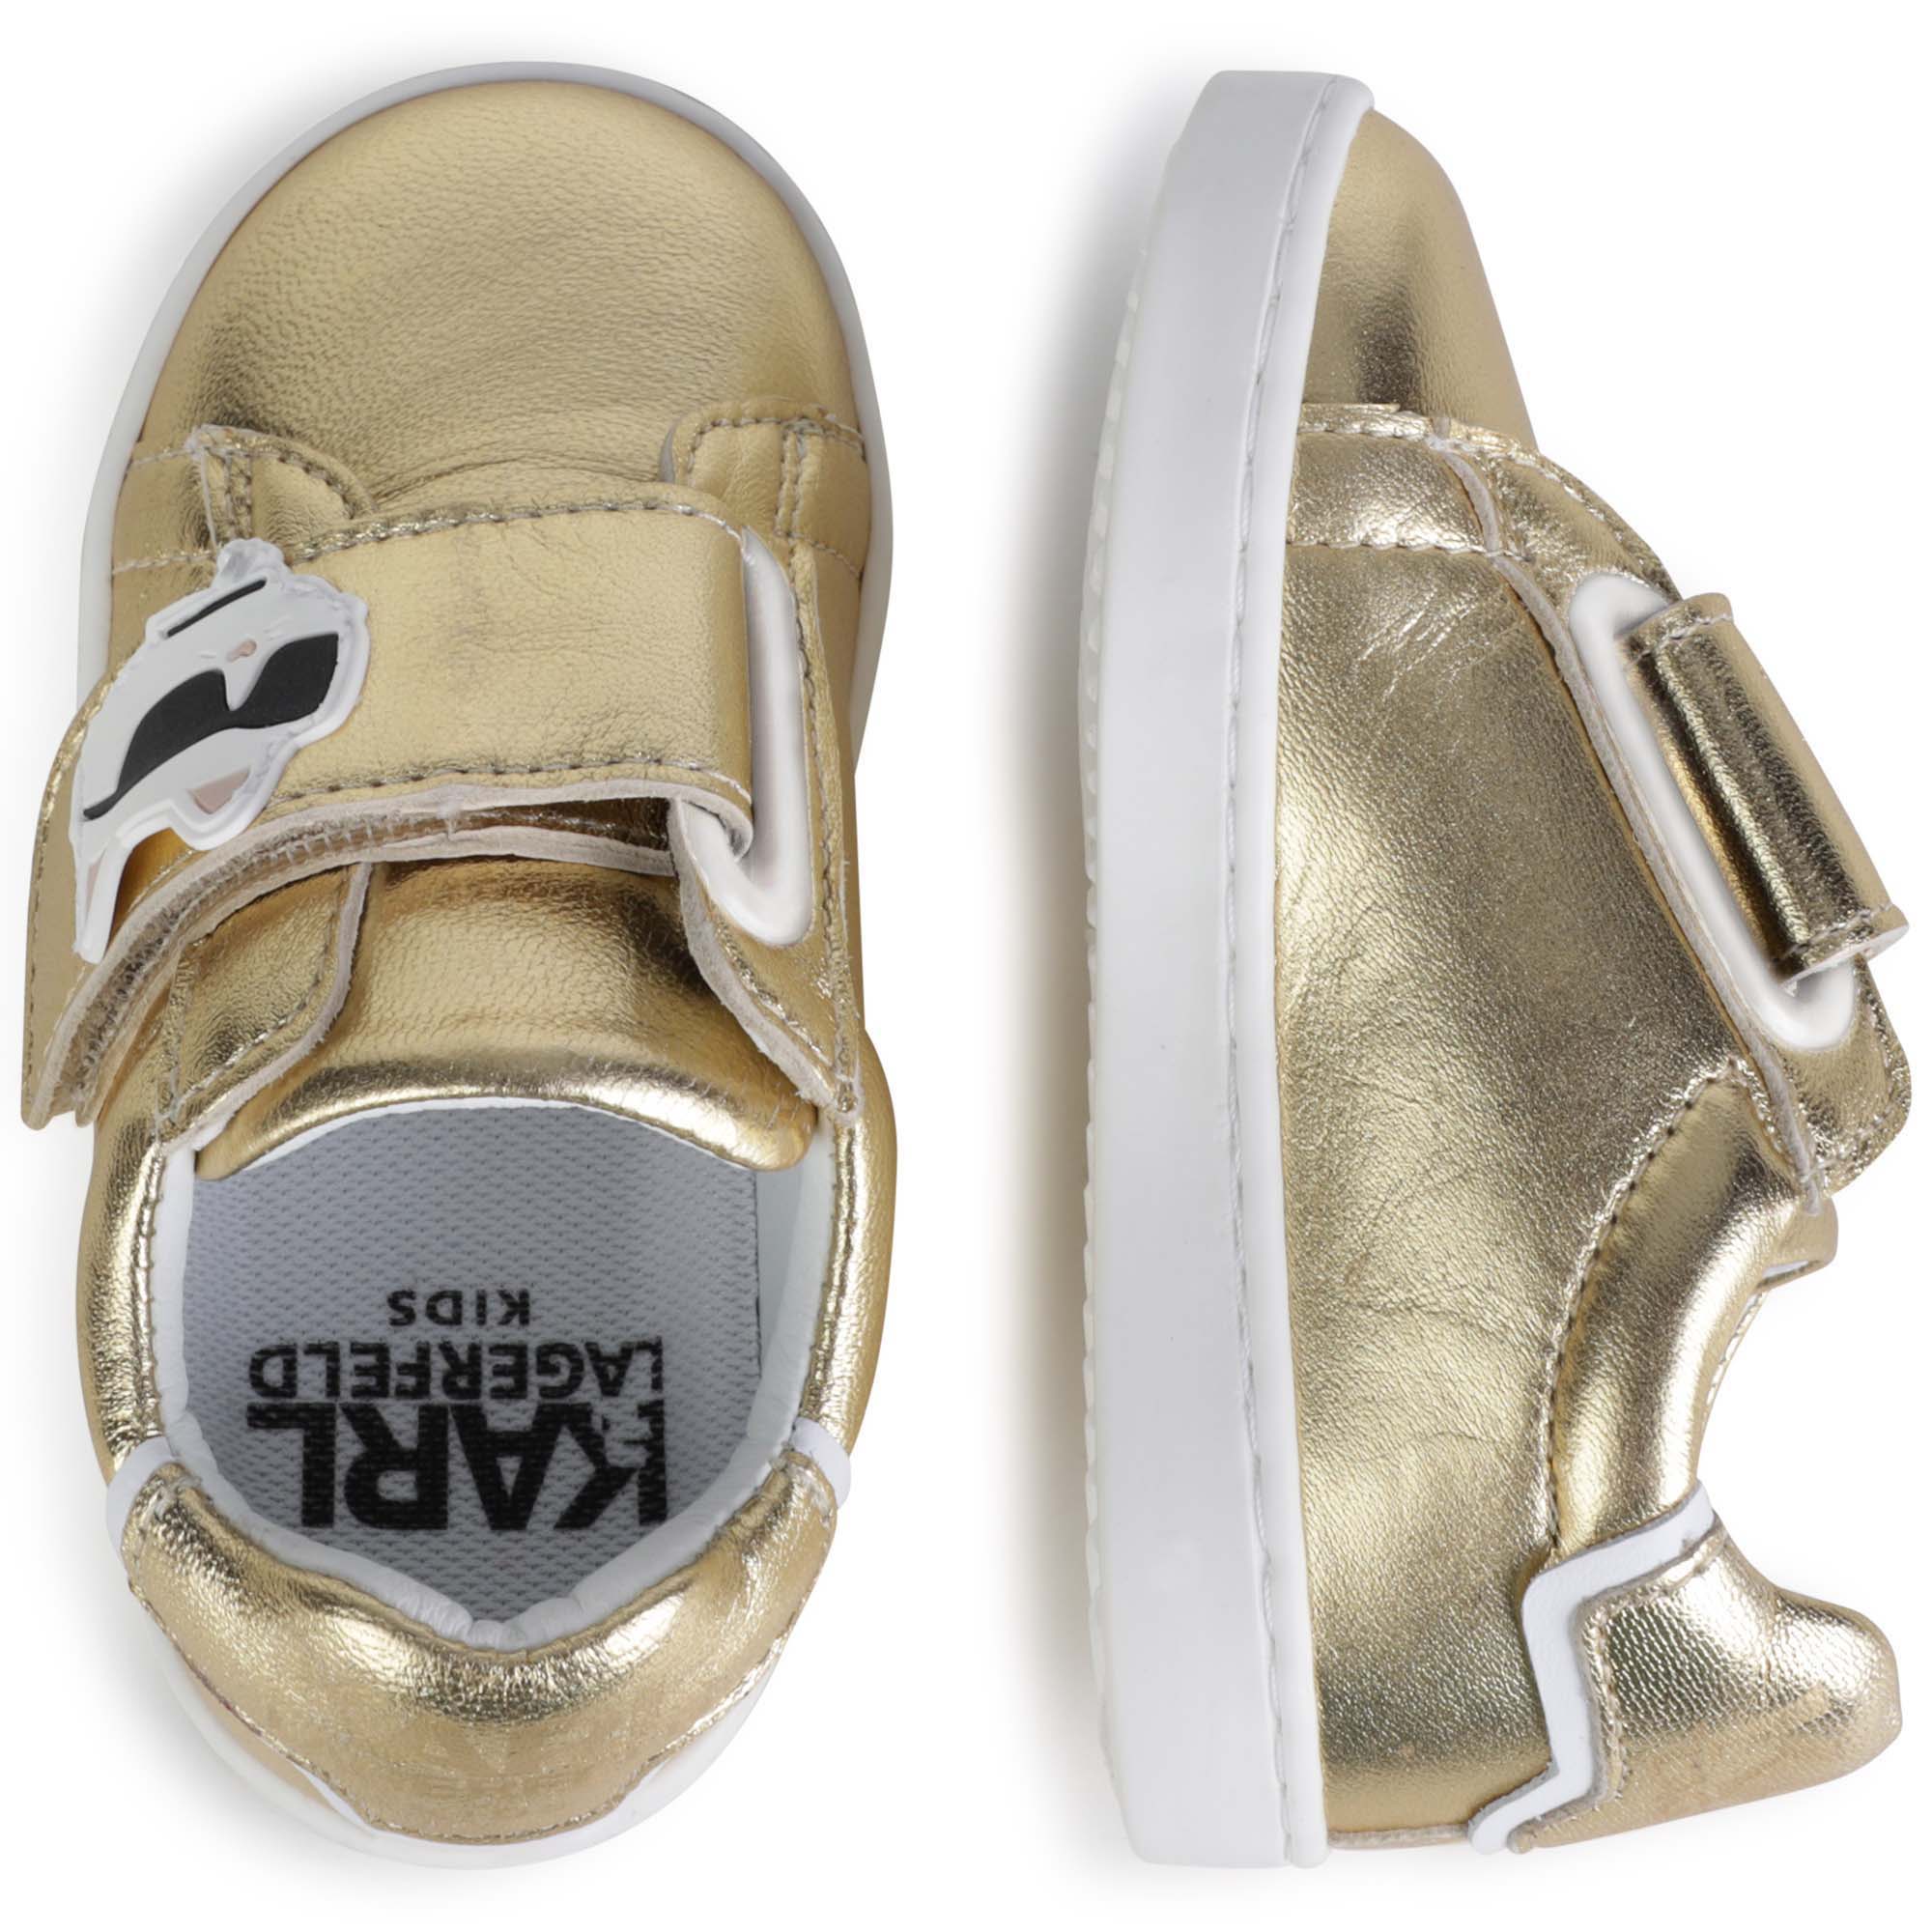 Leather trainers KARL LAGERFELD KIDS for GIRL